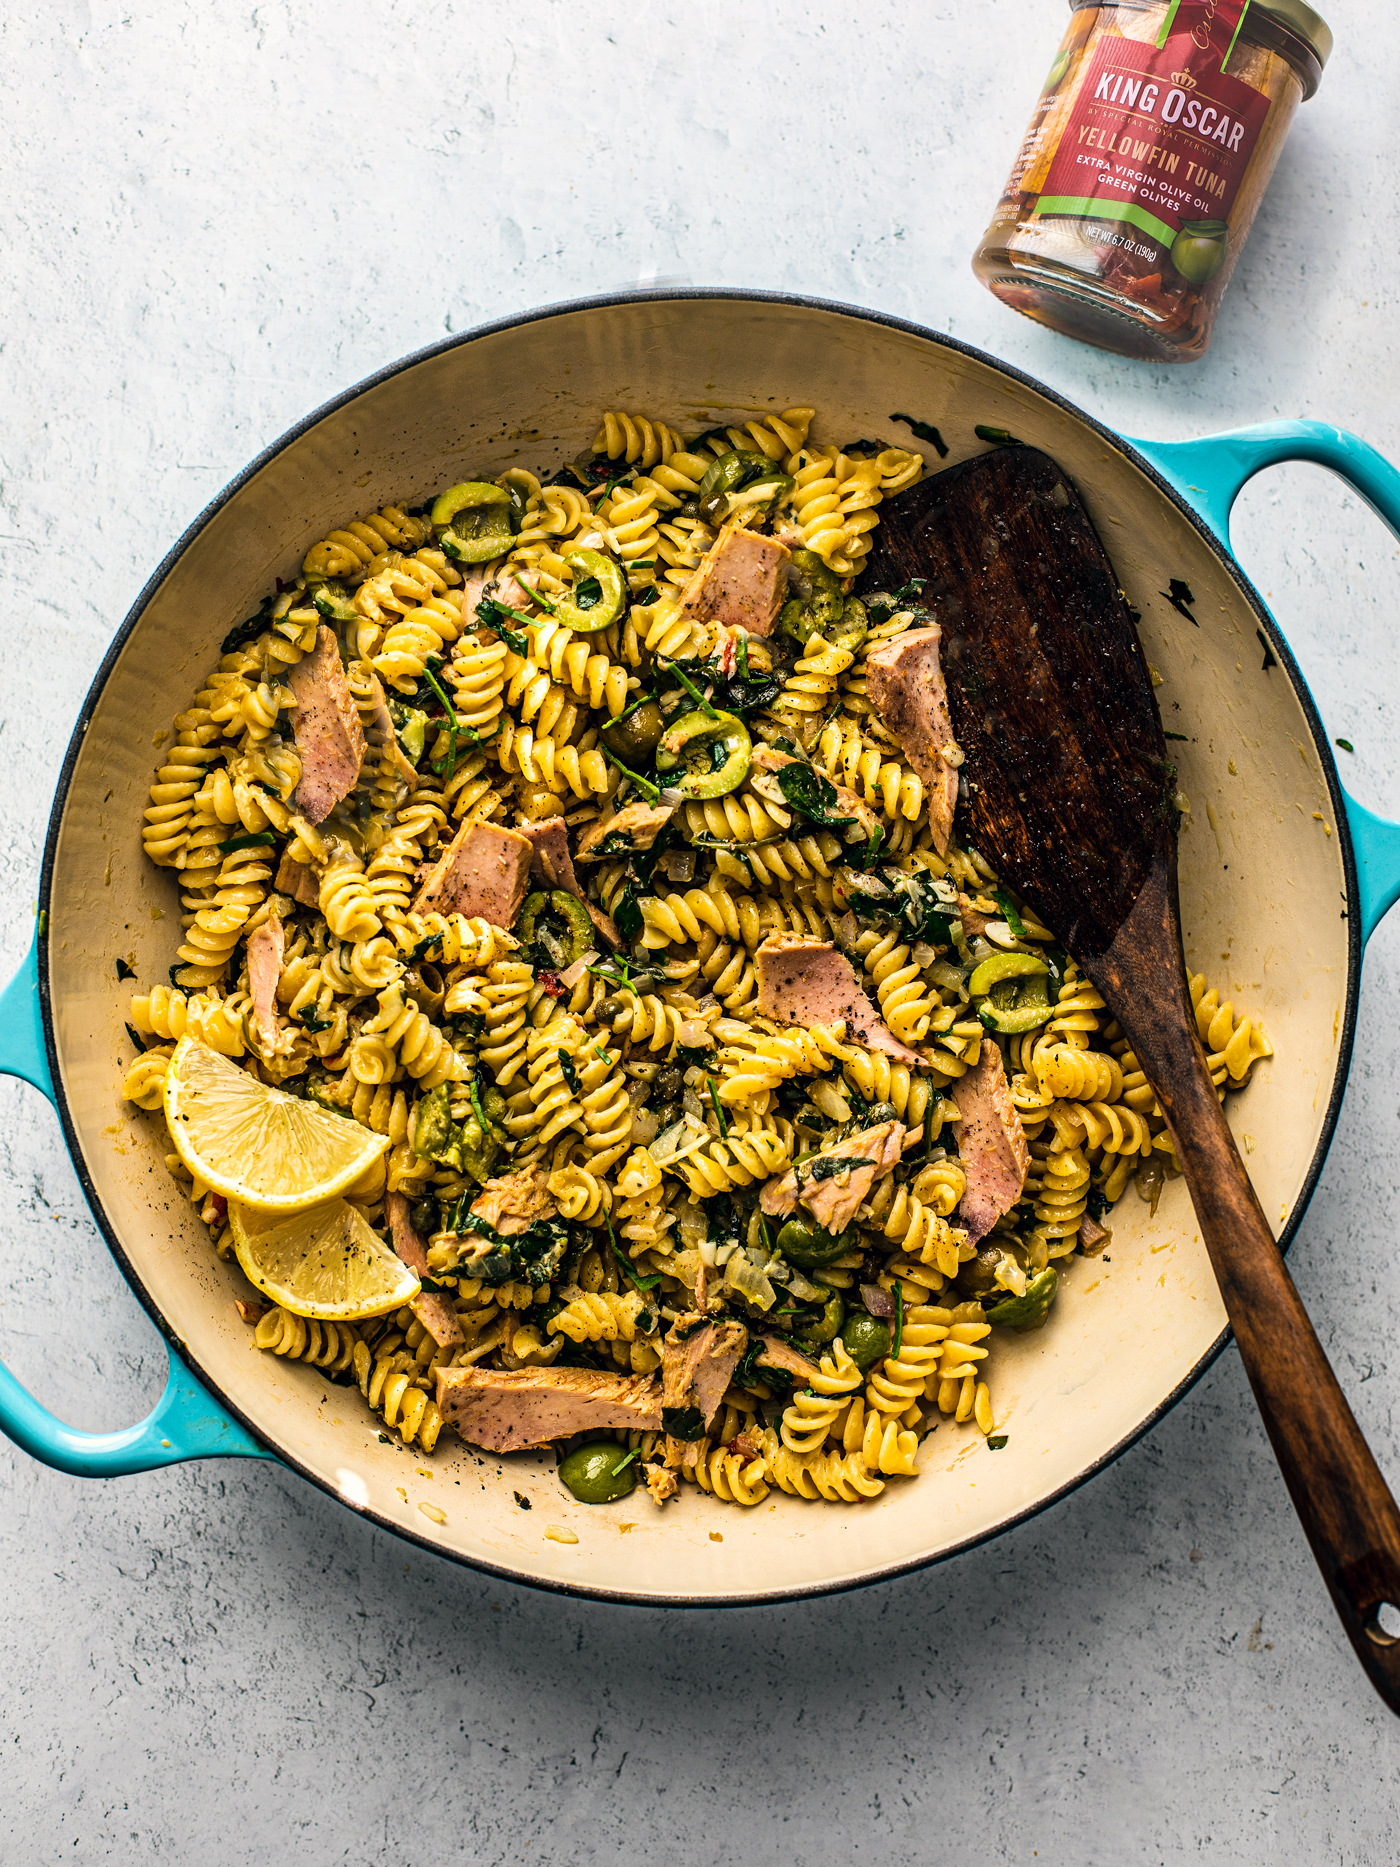 Pan of pasta with spinach and tuna, and a jar of King Oscar tuna next to it.